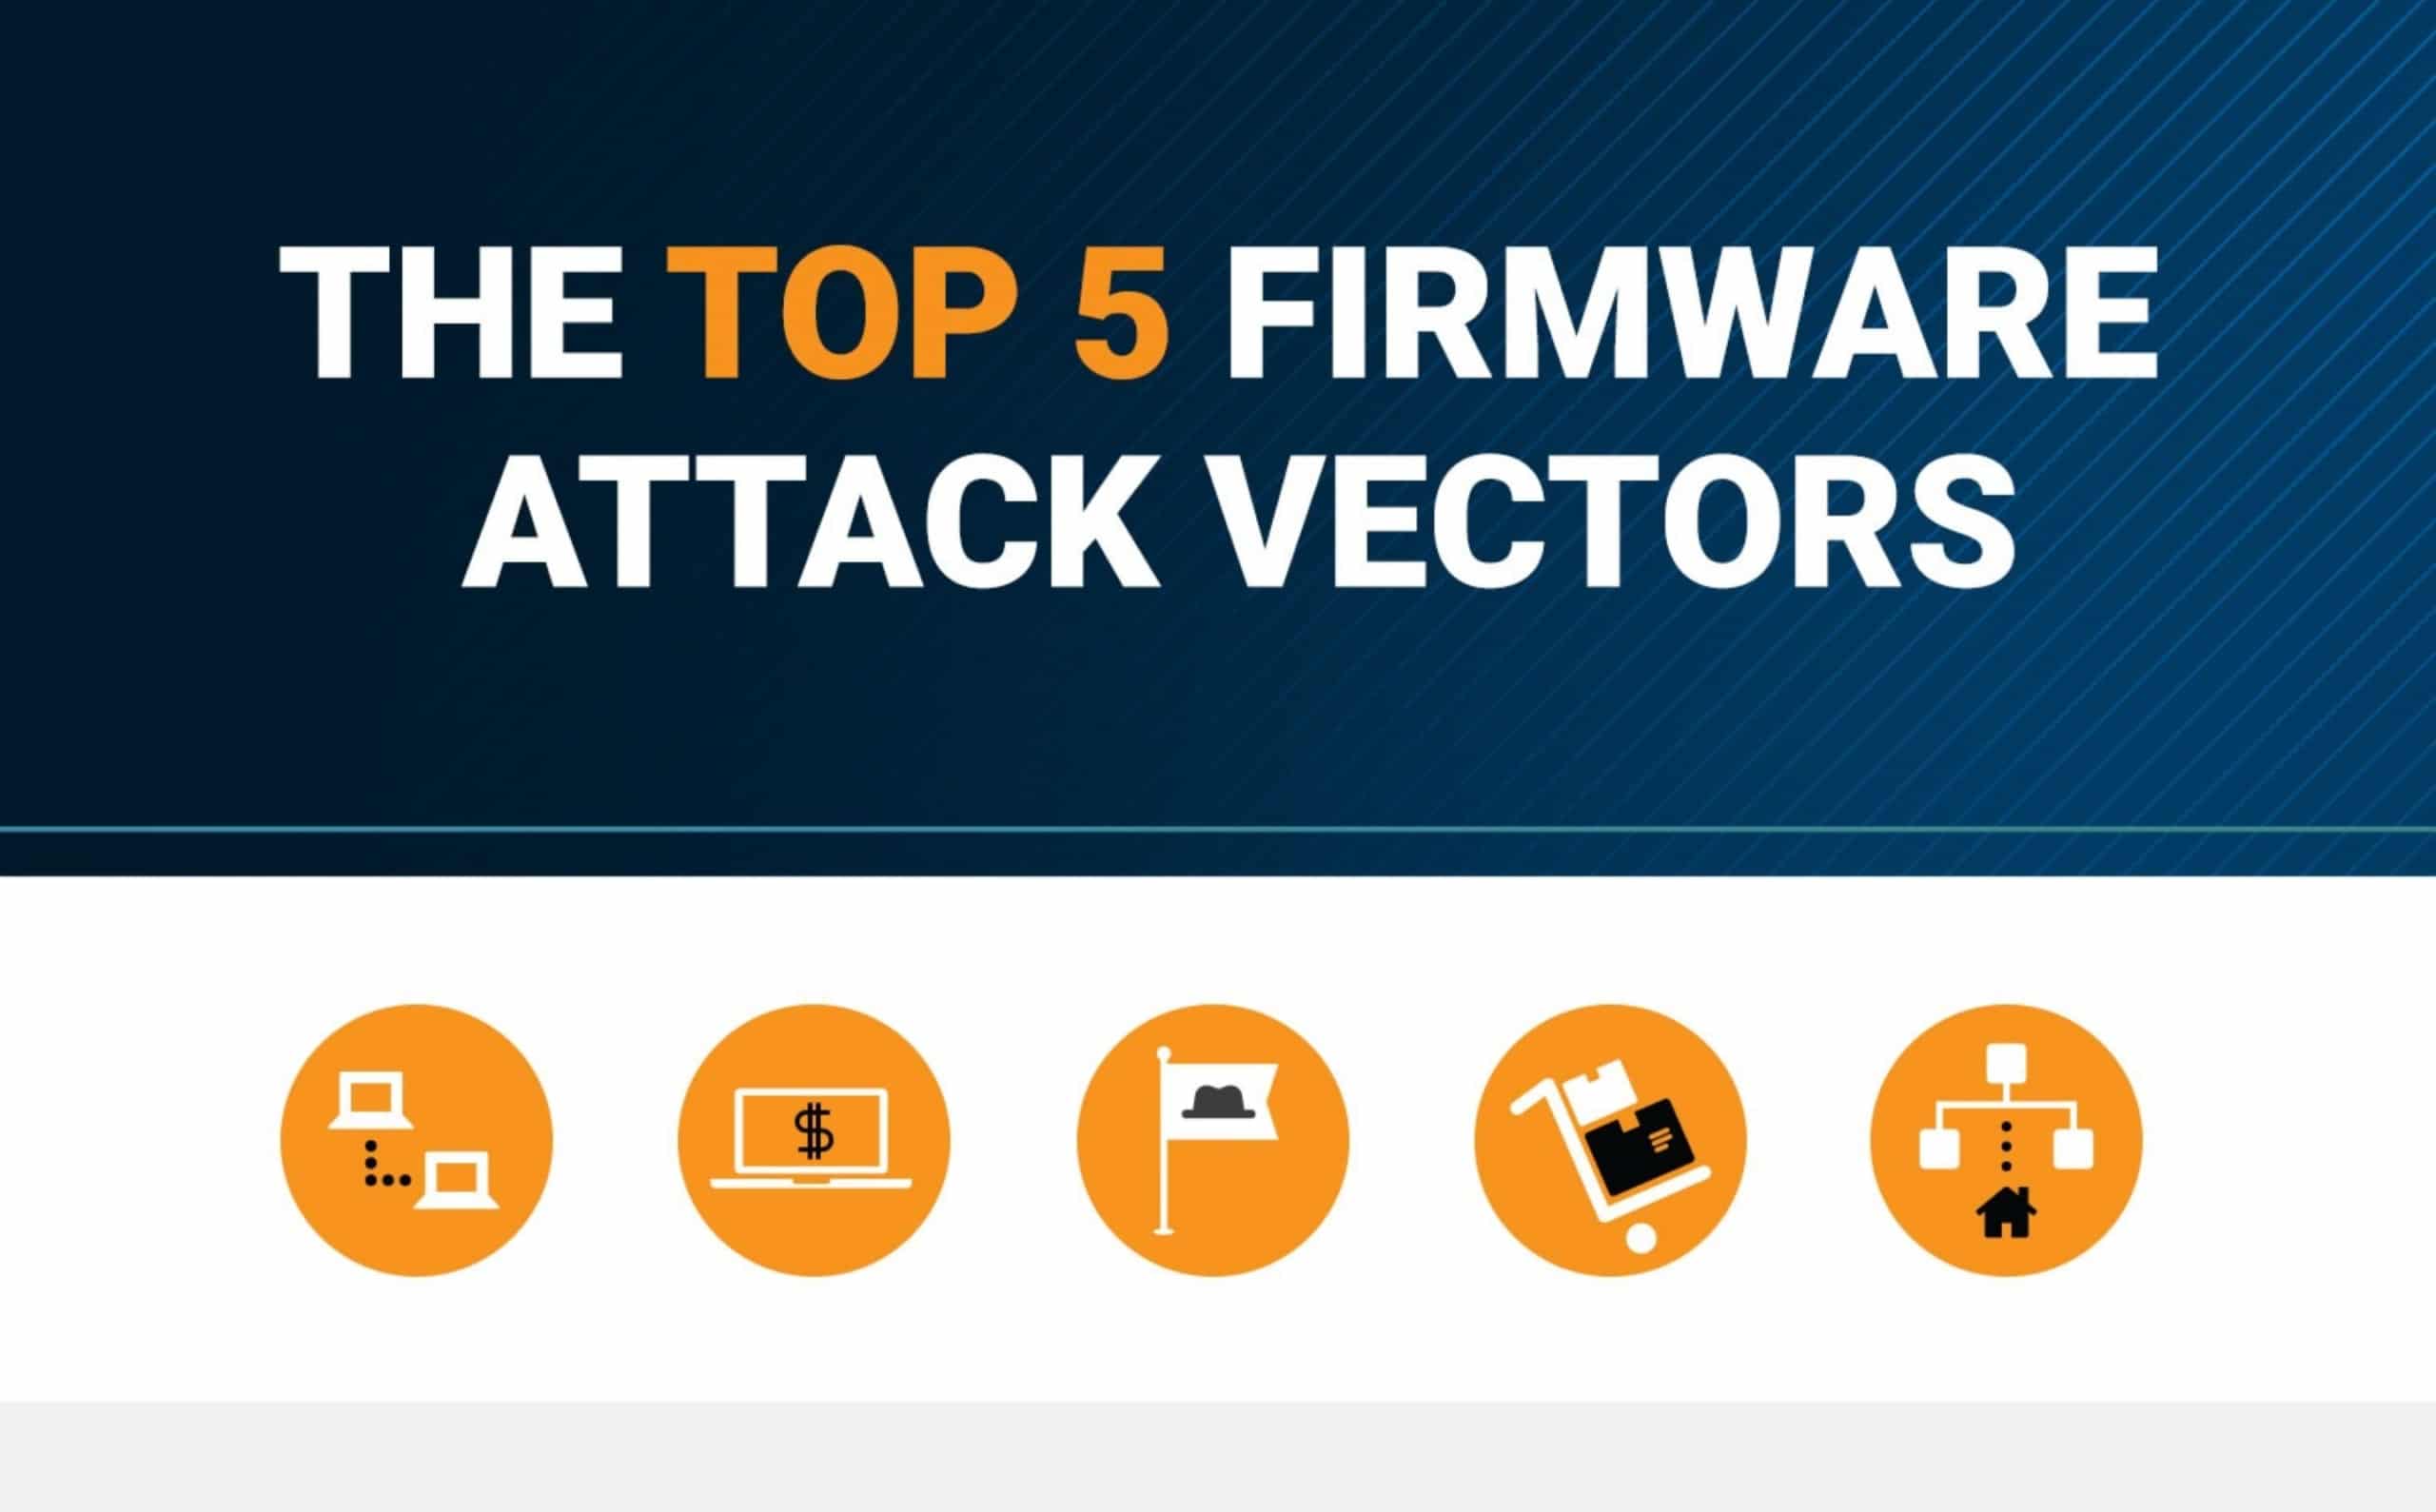 The top 5 firmware attack vectors with orange industry icons